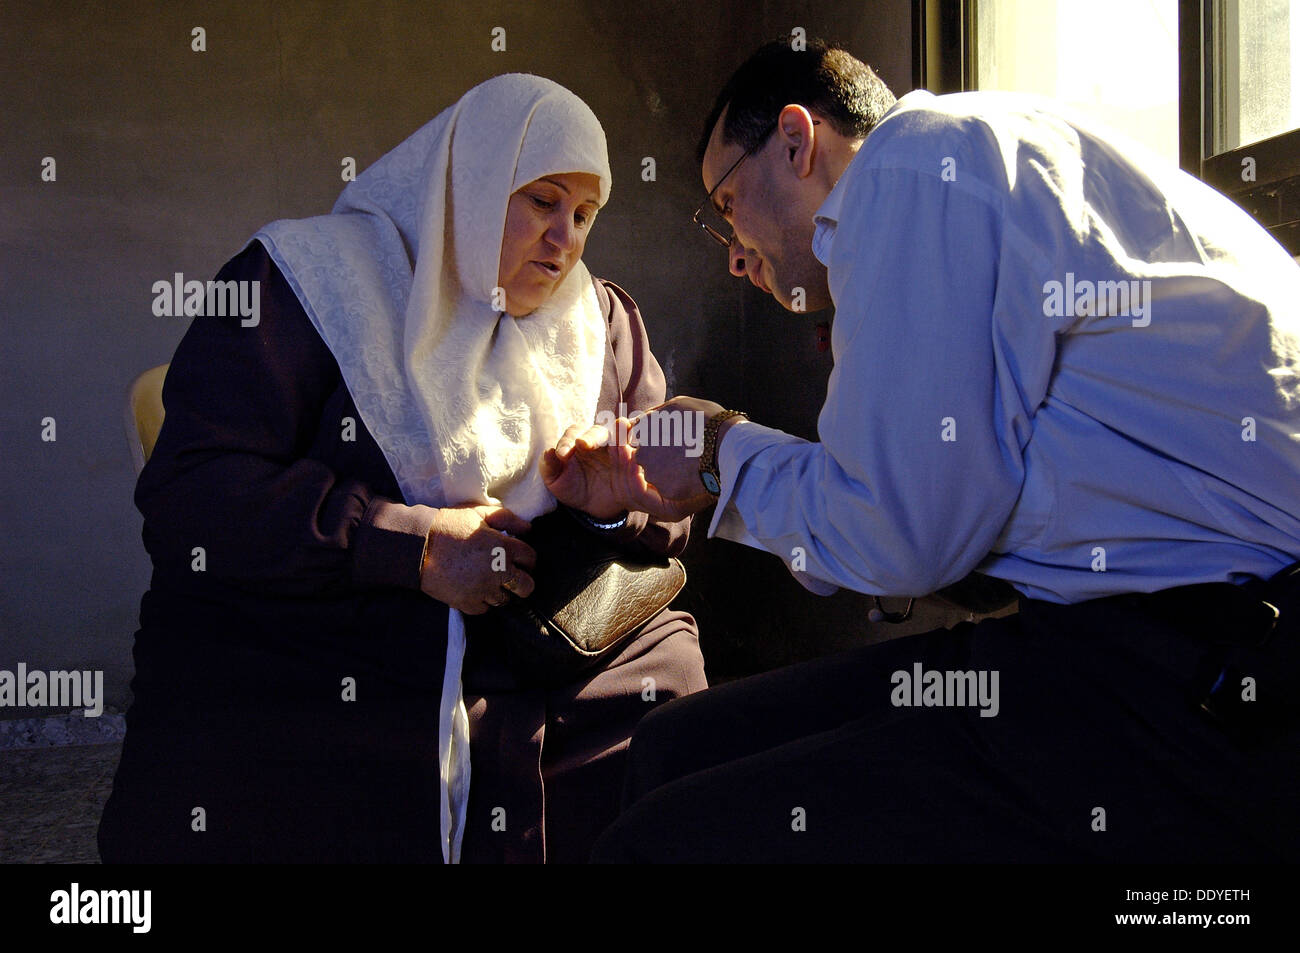 An Israeli Arab volunteer from the PHR Physicians for Human Rights checking a Palestinian woman during a PHR mobile clinic visit in the West Bank Israel Stock Photo